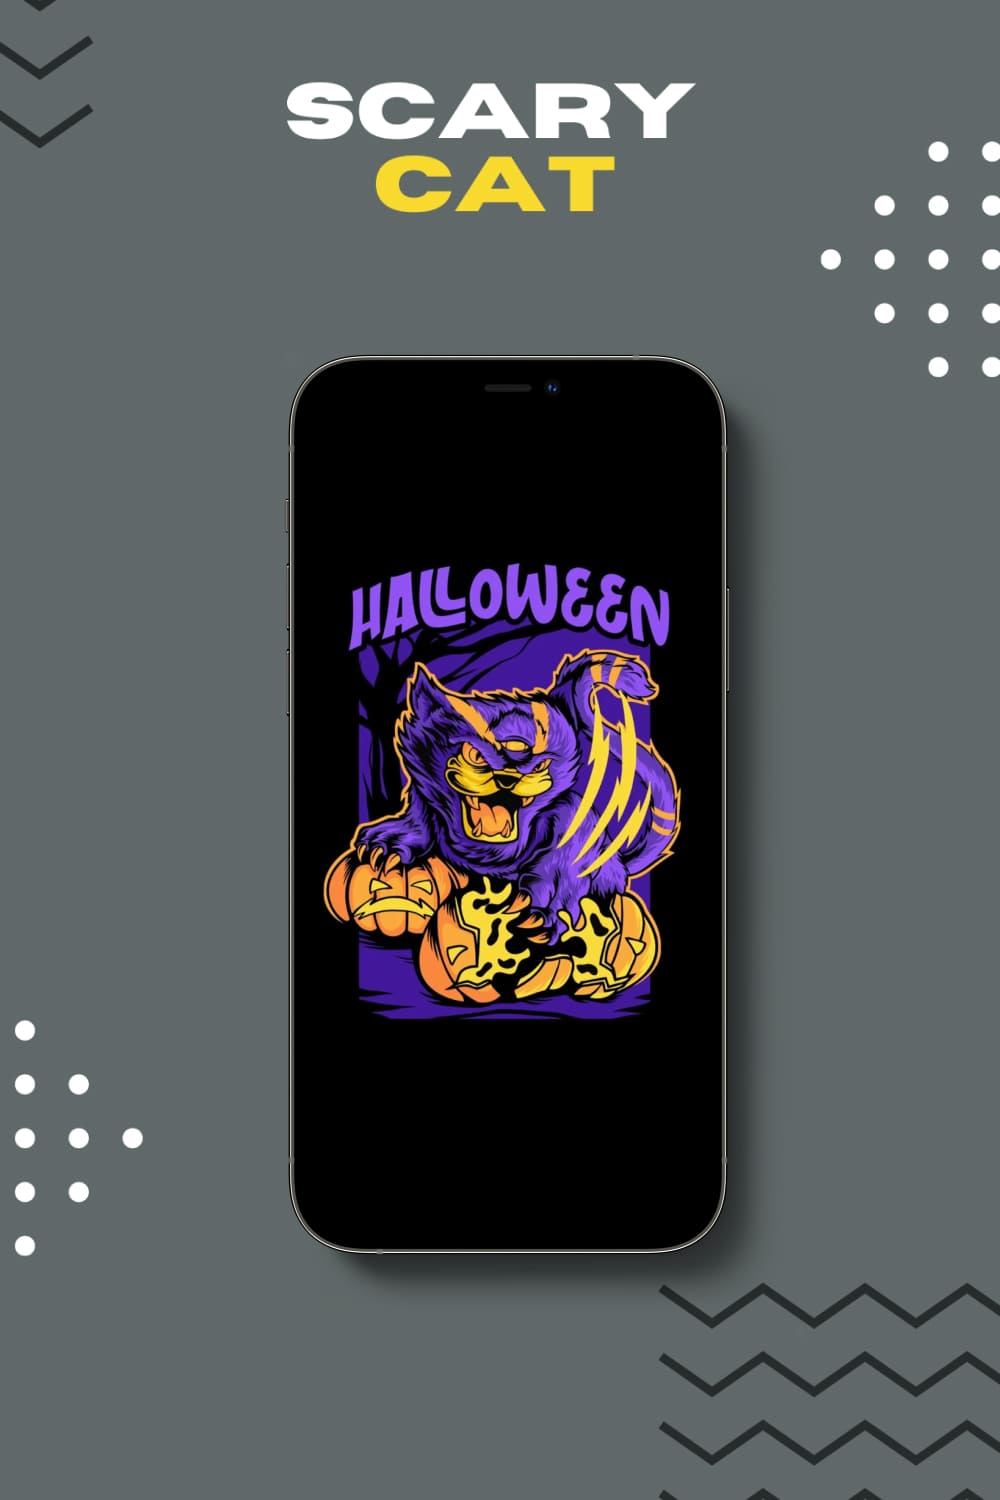 Scary purple cat on the smartphone screen.